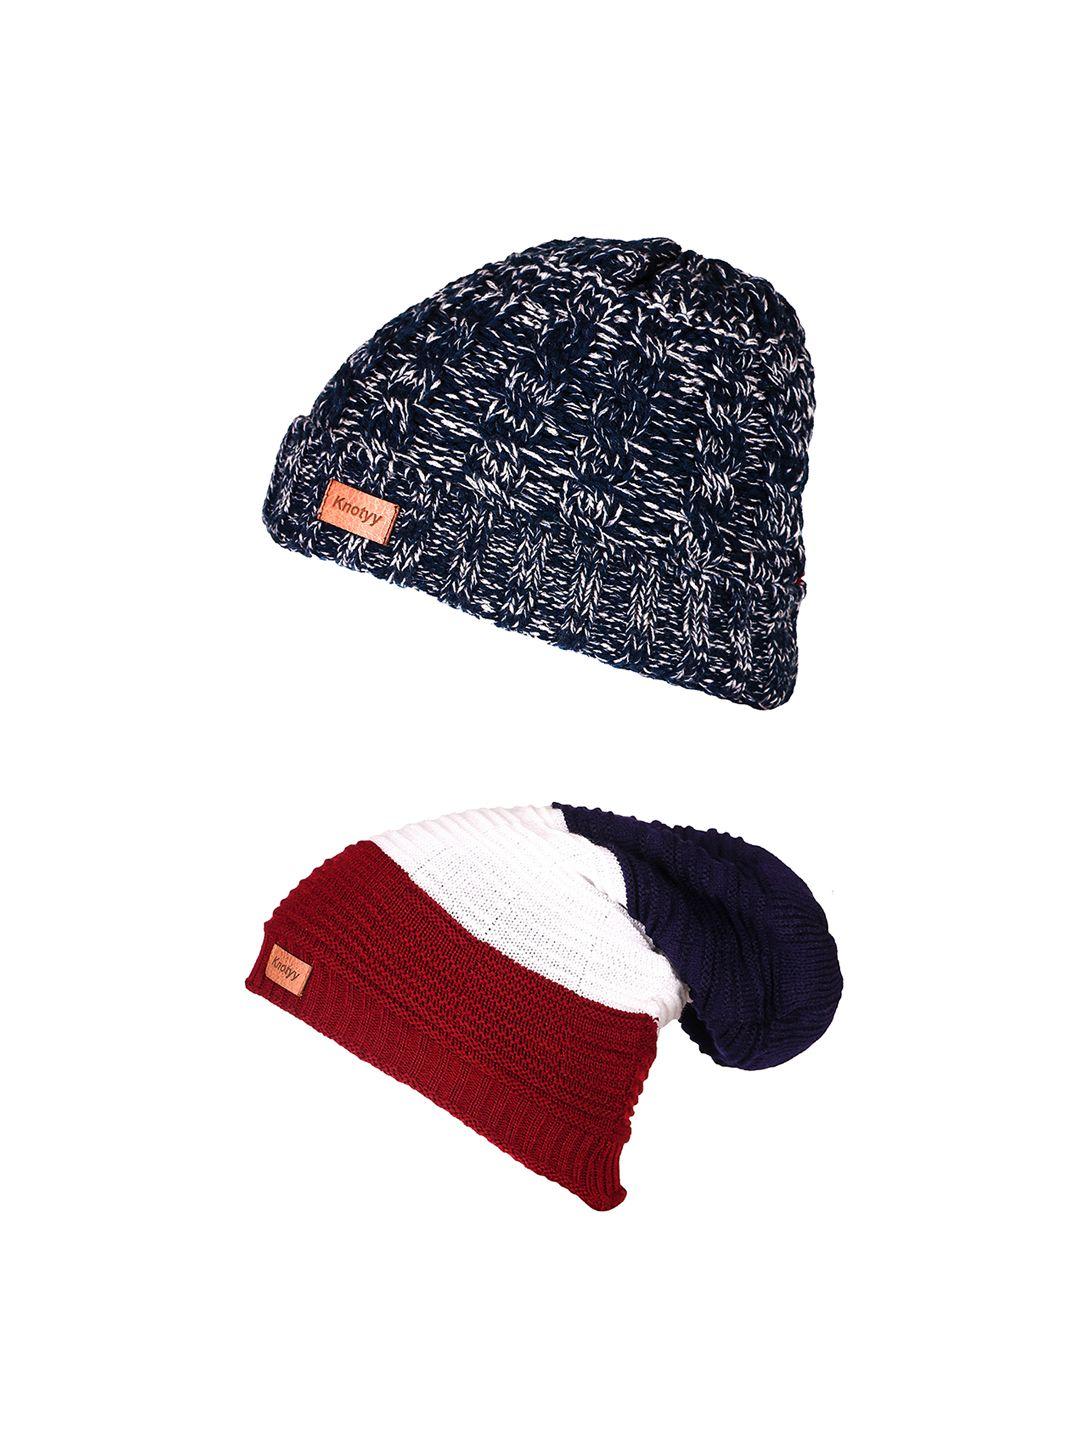 knotyy-men-pack-of-2-beanie